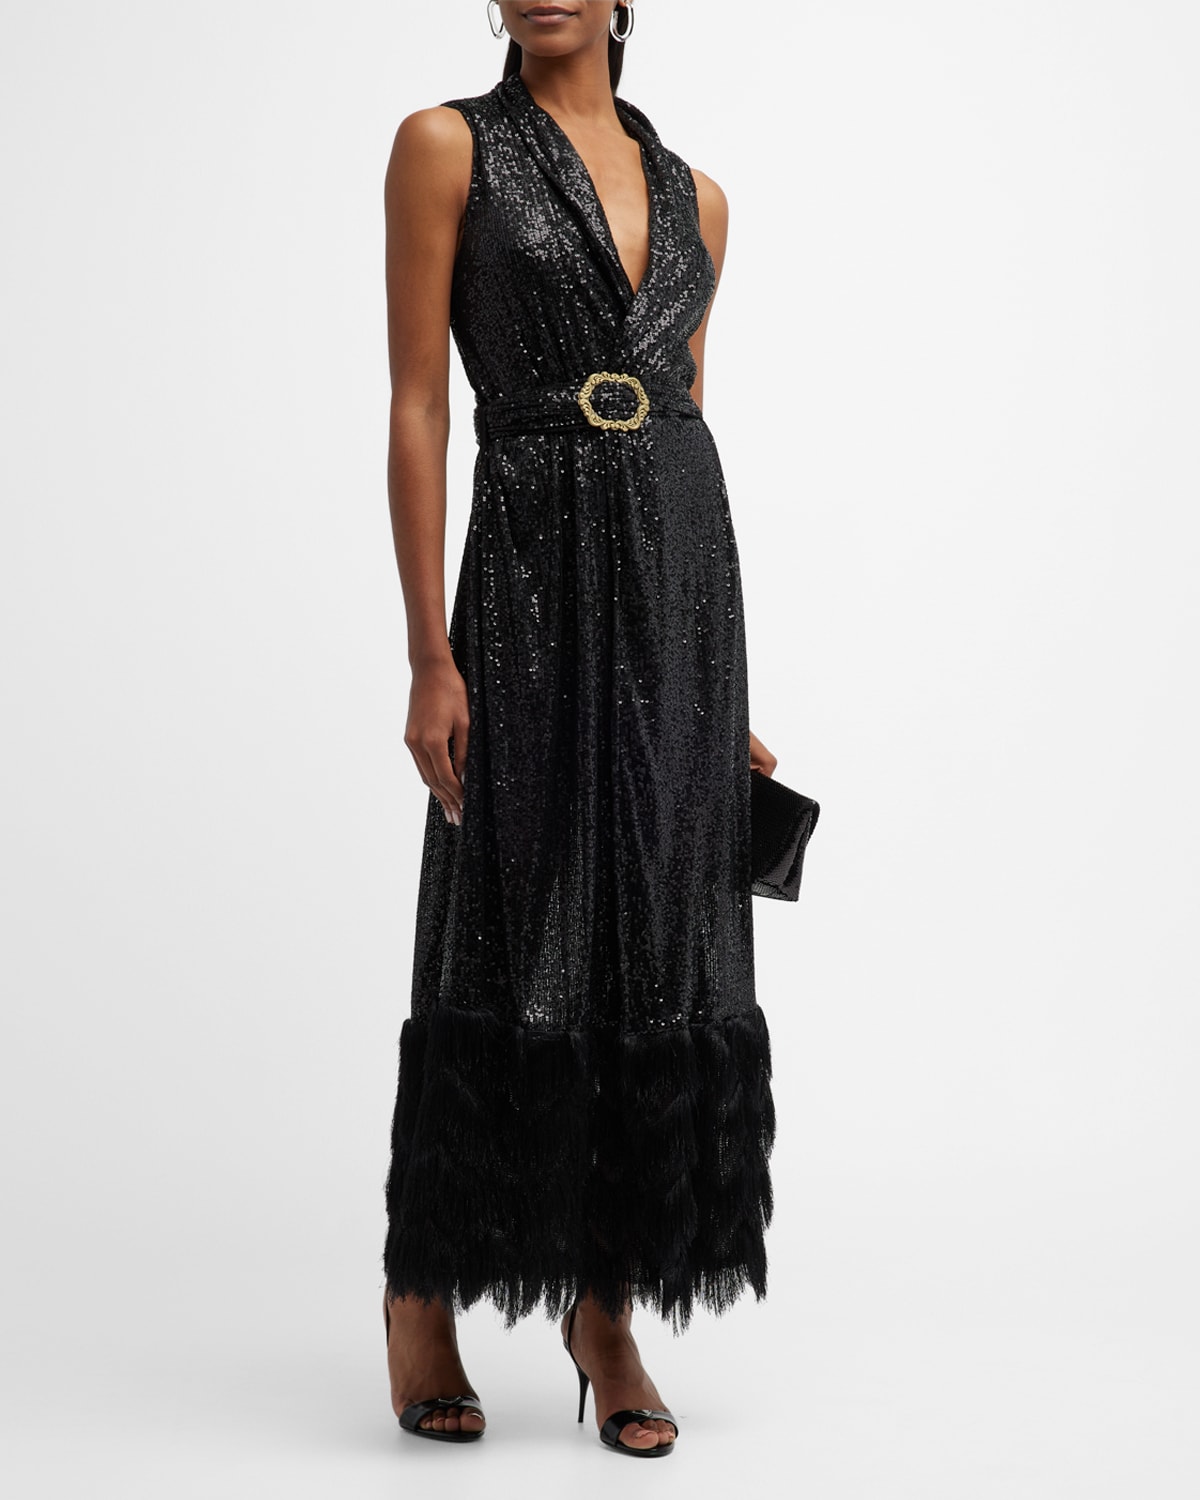 LACE The Label Sequin Belted Duster with Fringe